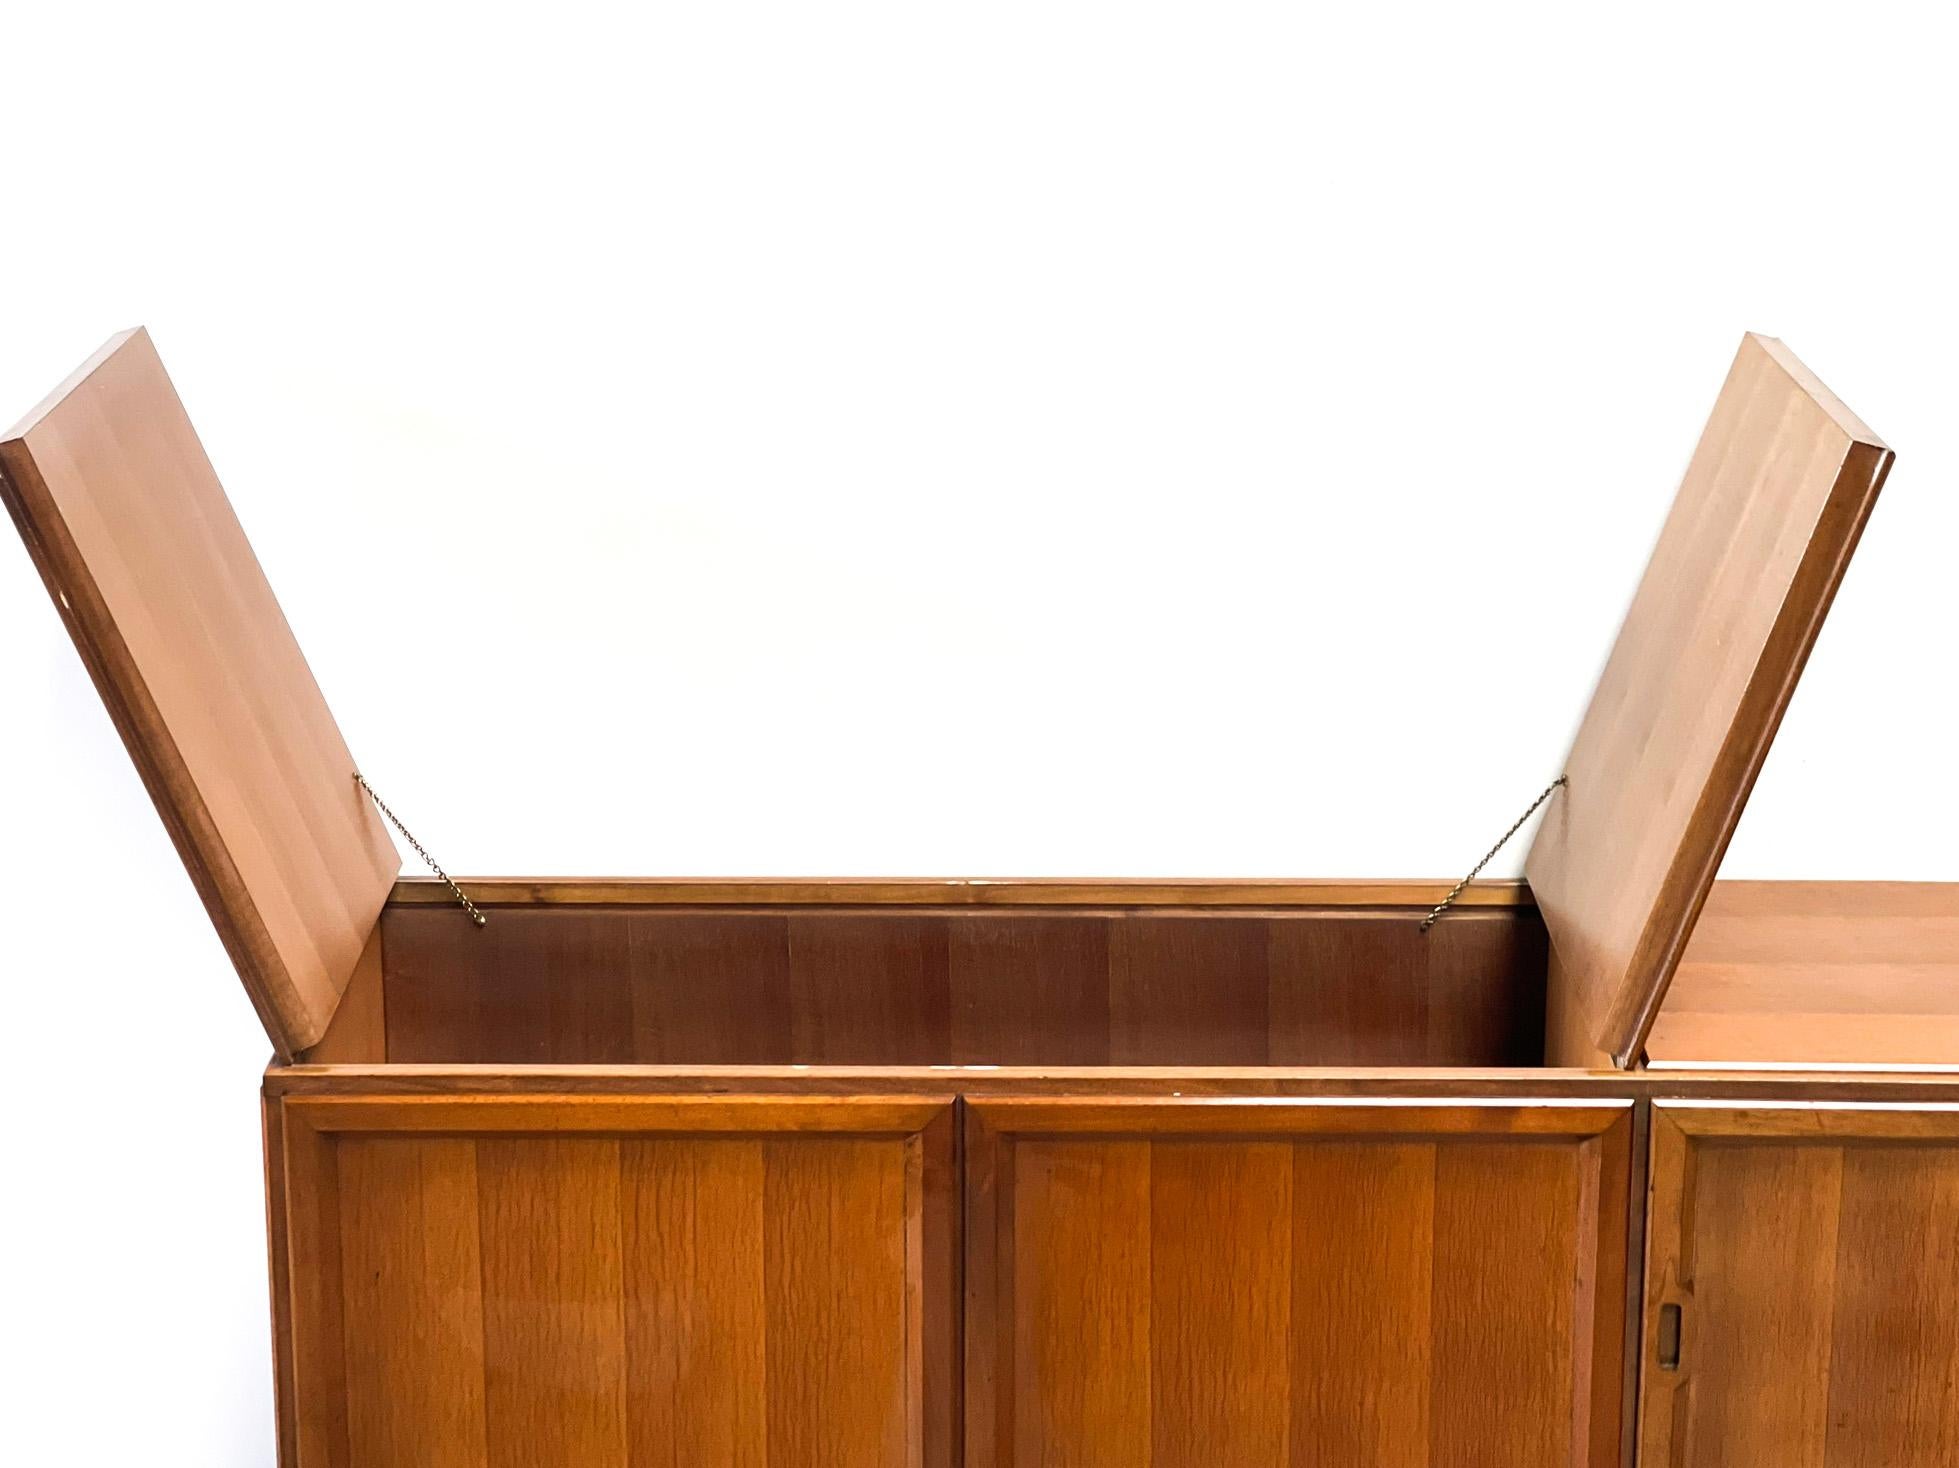 Rare mid century italian made sideboard with bar compartment. 

The sideboard has 3 drawers and 1 traditional door and also 2 doors at the top for bottle and glass storage.

Good condition.

1960s - Italy

Dimensions:
Lenght: 165cm/64.83